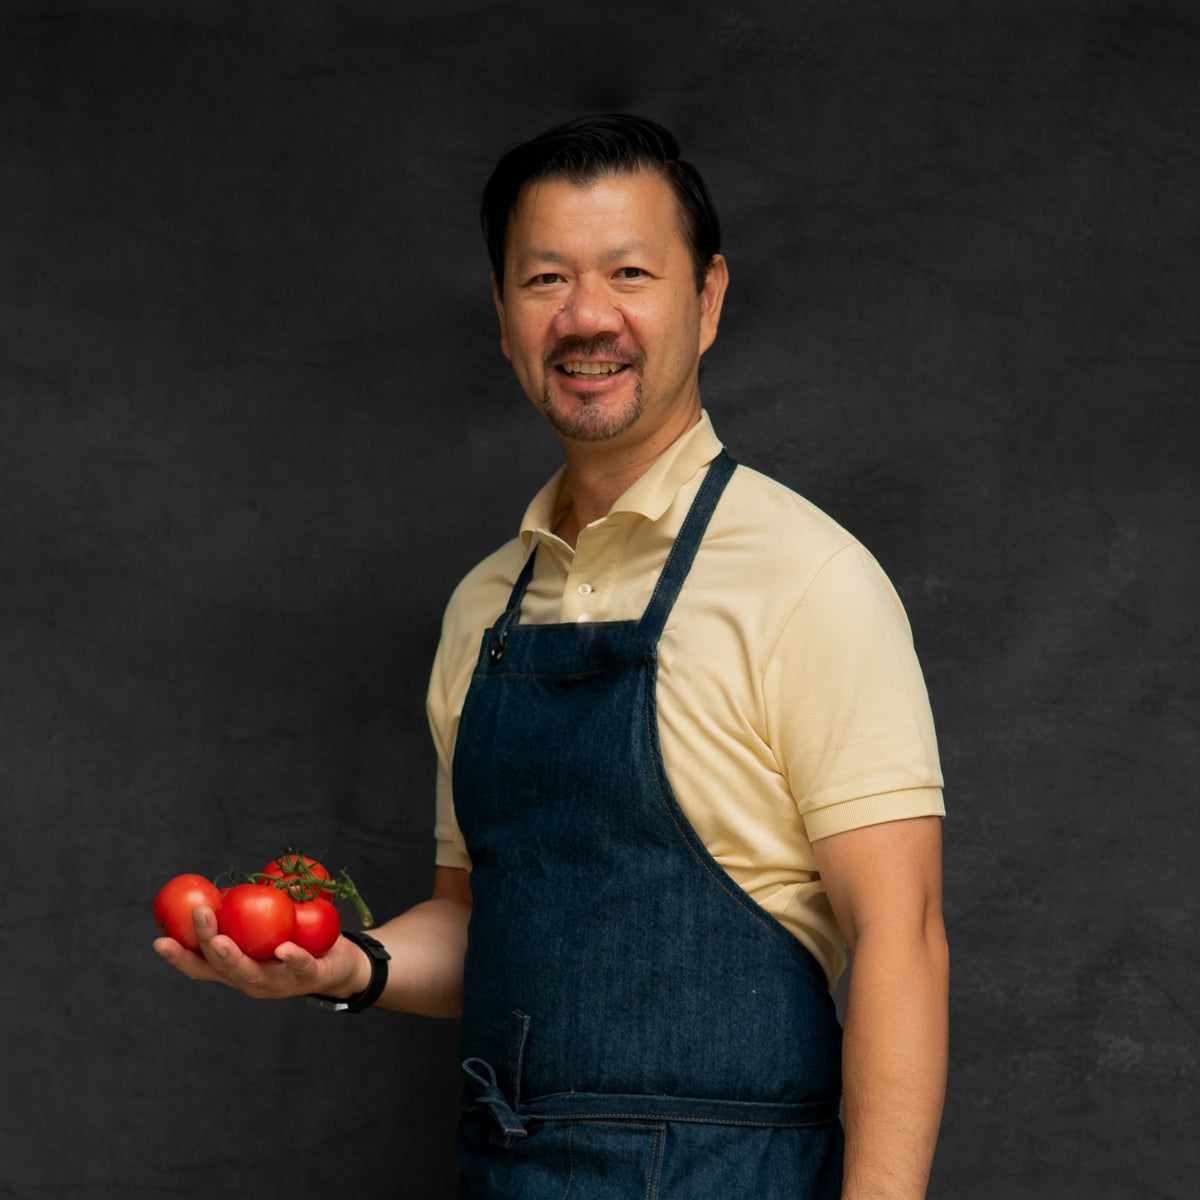 A portrait of Ben, FoodSt Cook holding tomatoes  against a black background